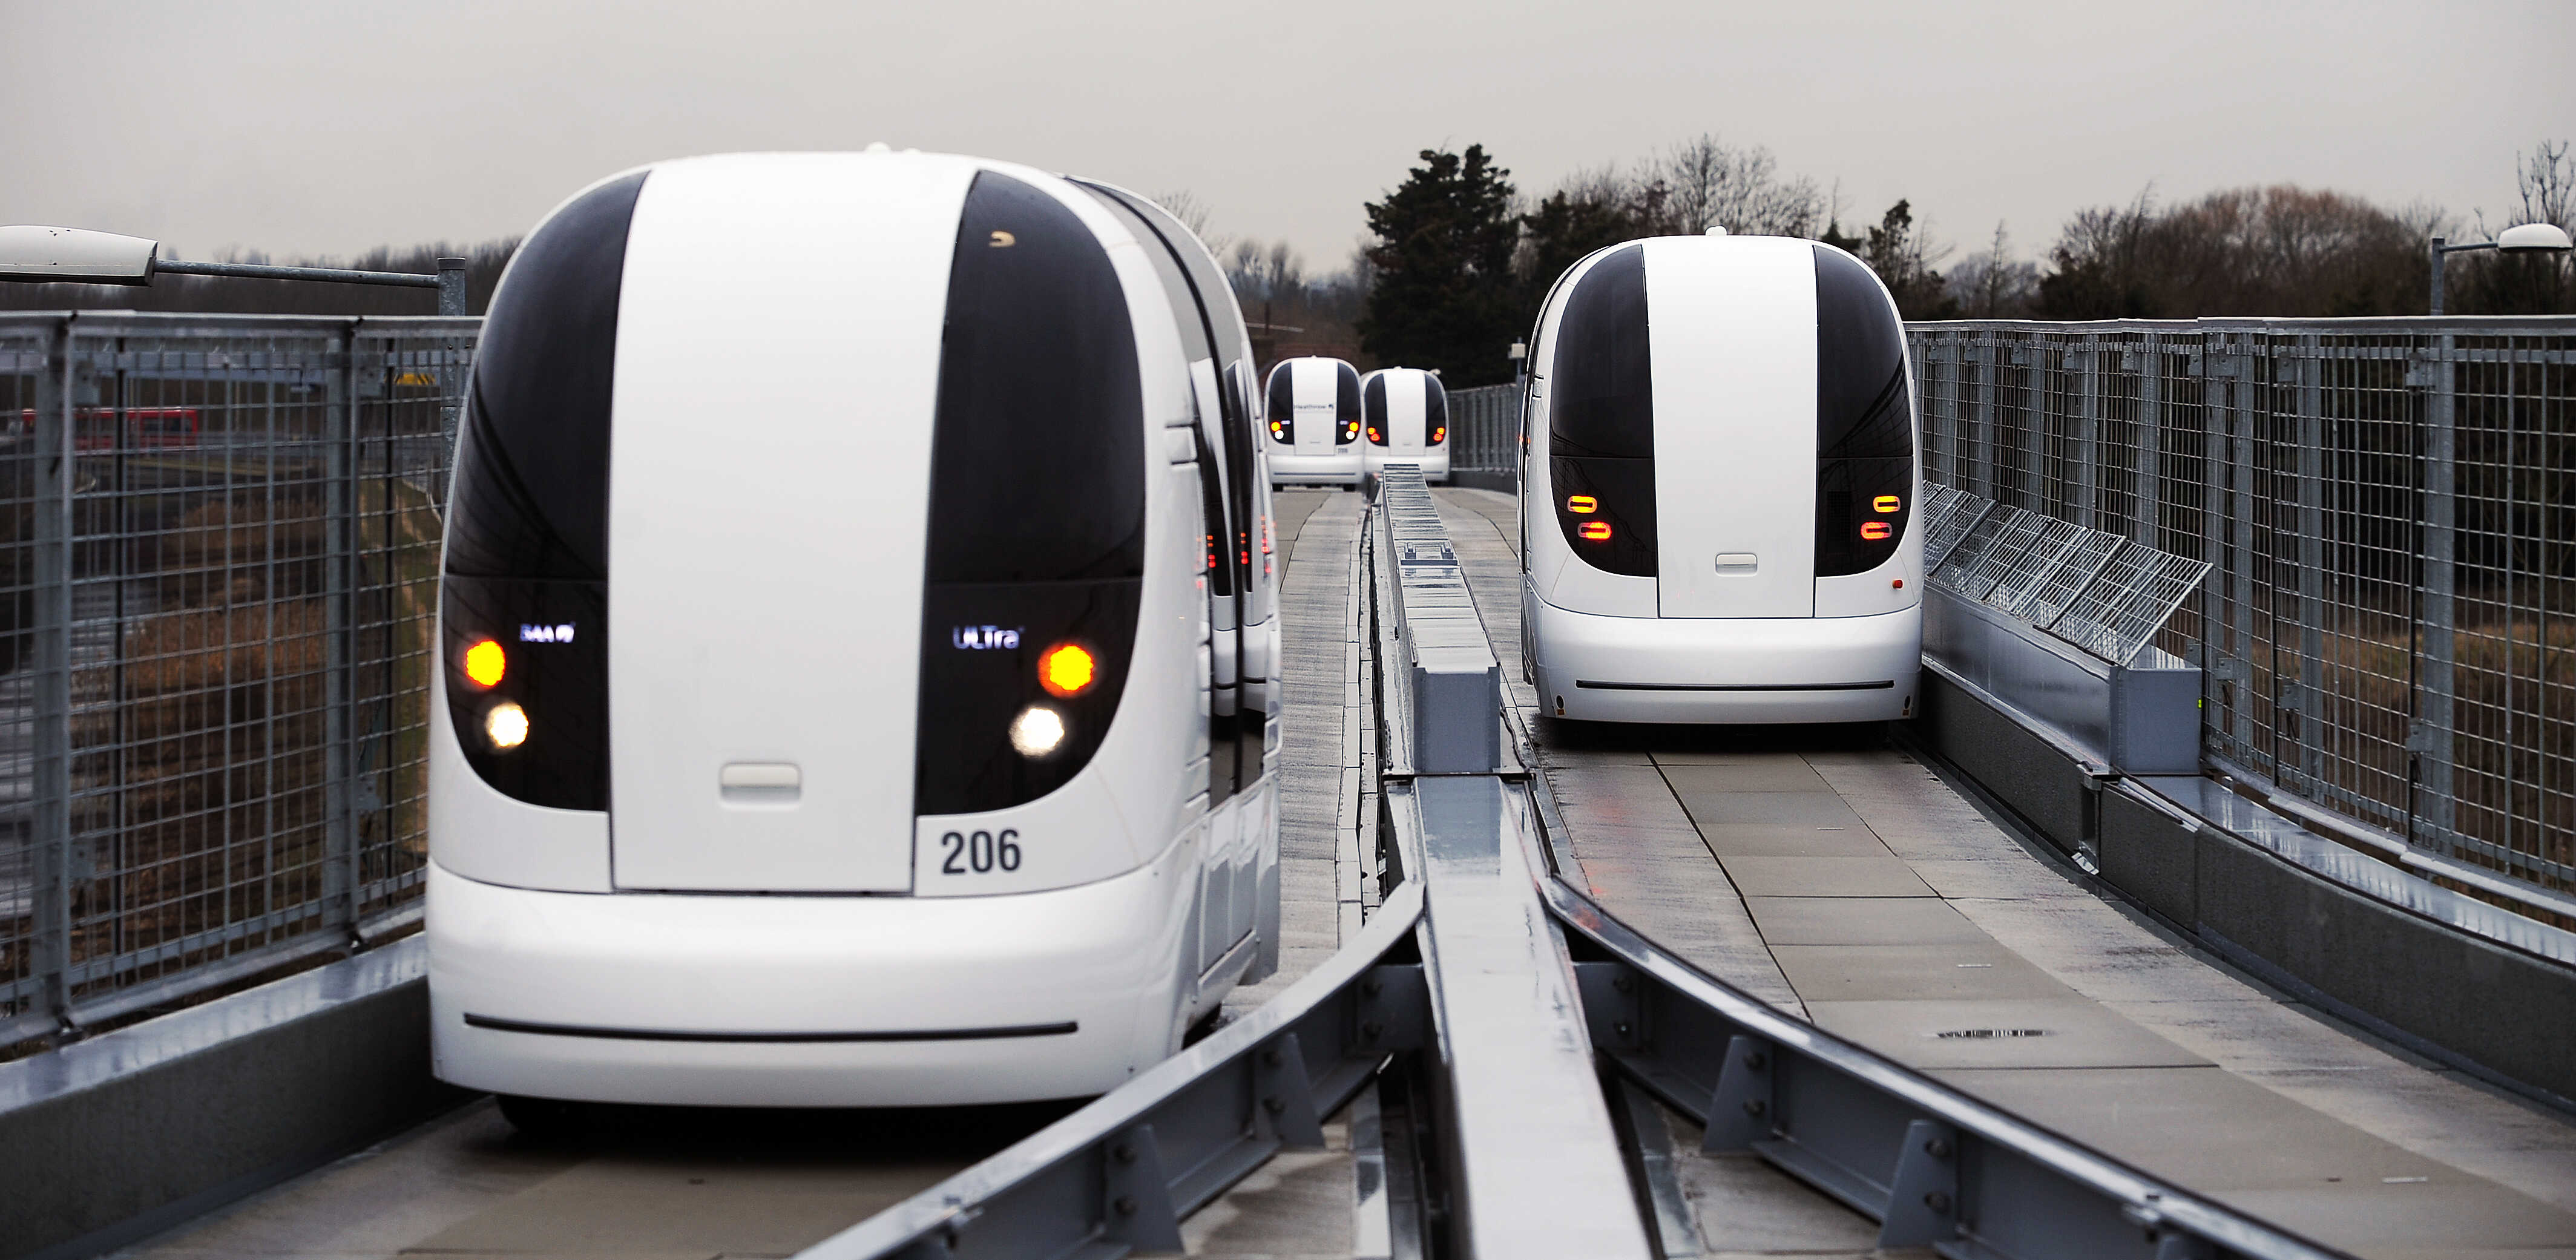 driverless pods on guideway network